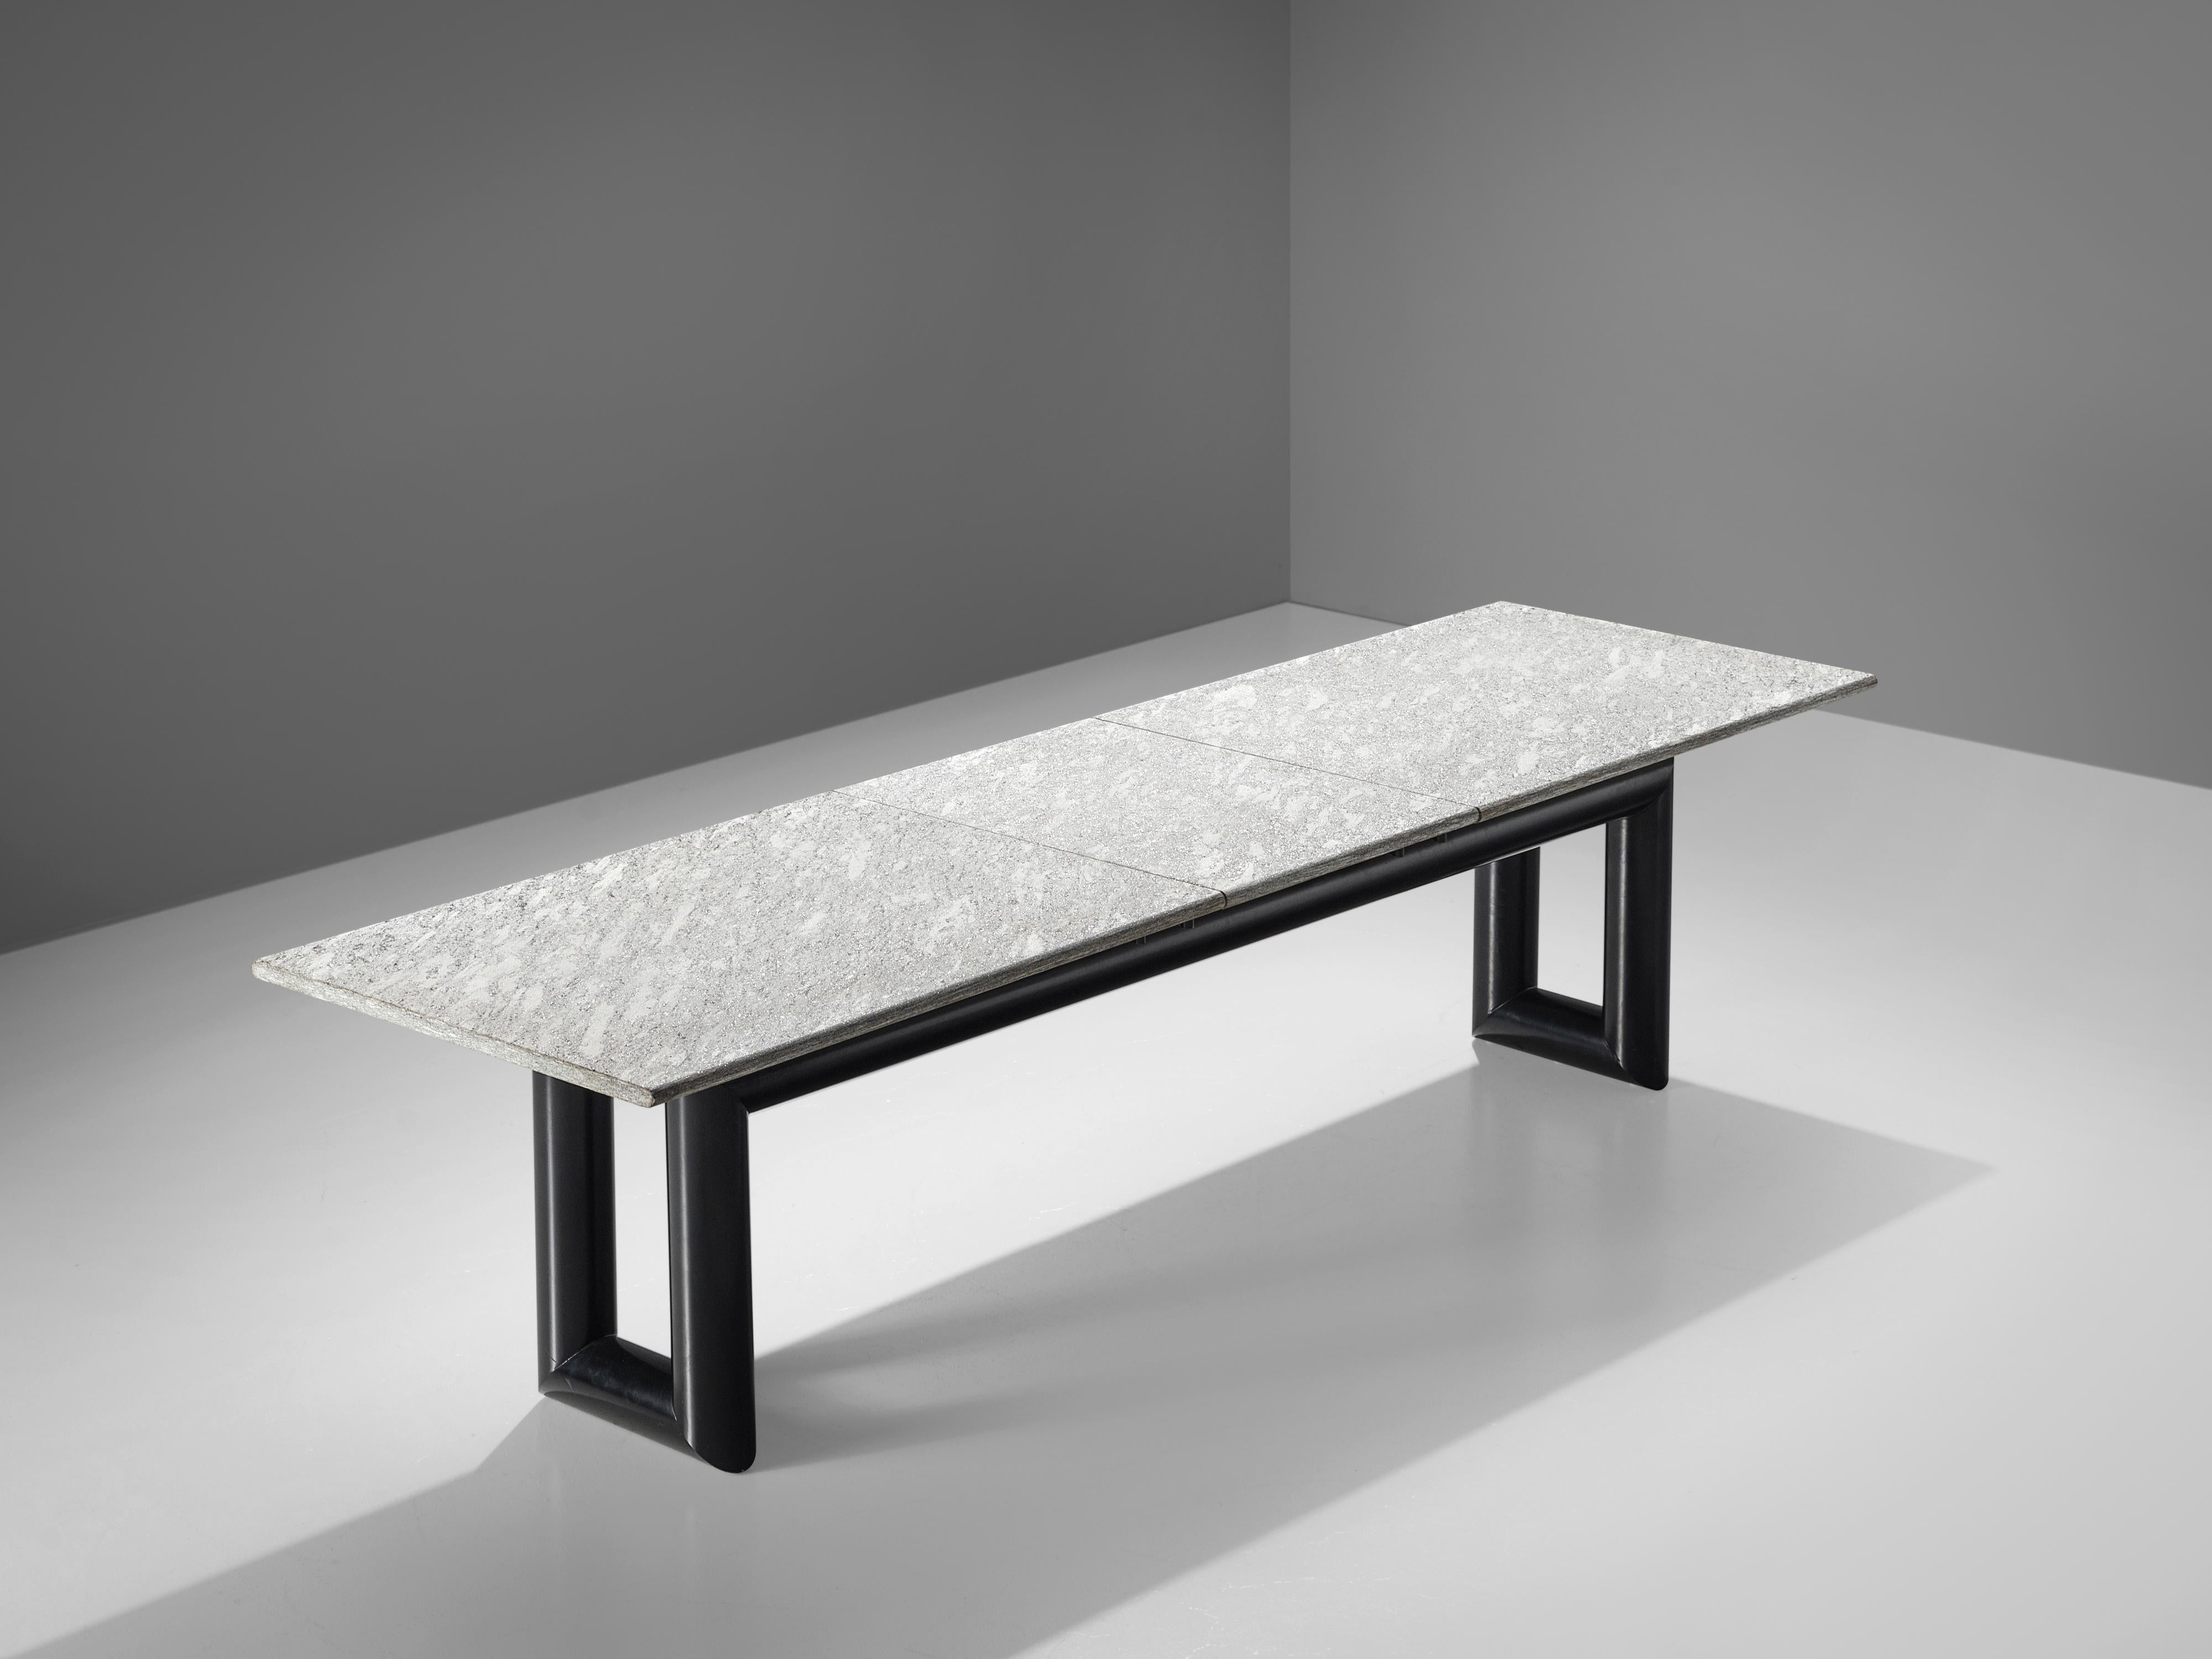 Mario Botta for Alias, dining table model ‘Terzo’, metal, granite, Italy, 1983
 
The ‘Terzo’ dining table features a long rectangular granite tabletop that consists of three parts and shows a beautiful sparkle and a play of different color shaded